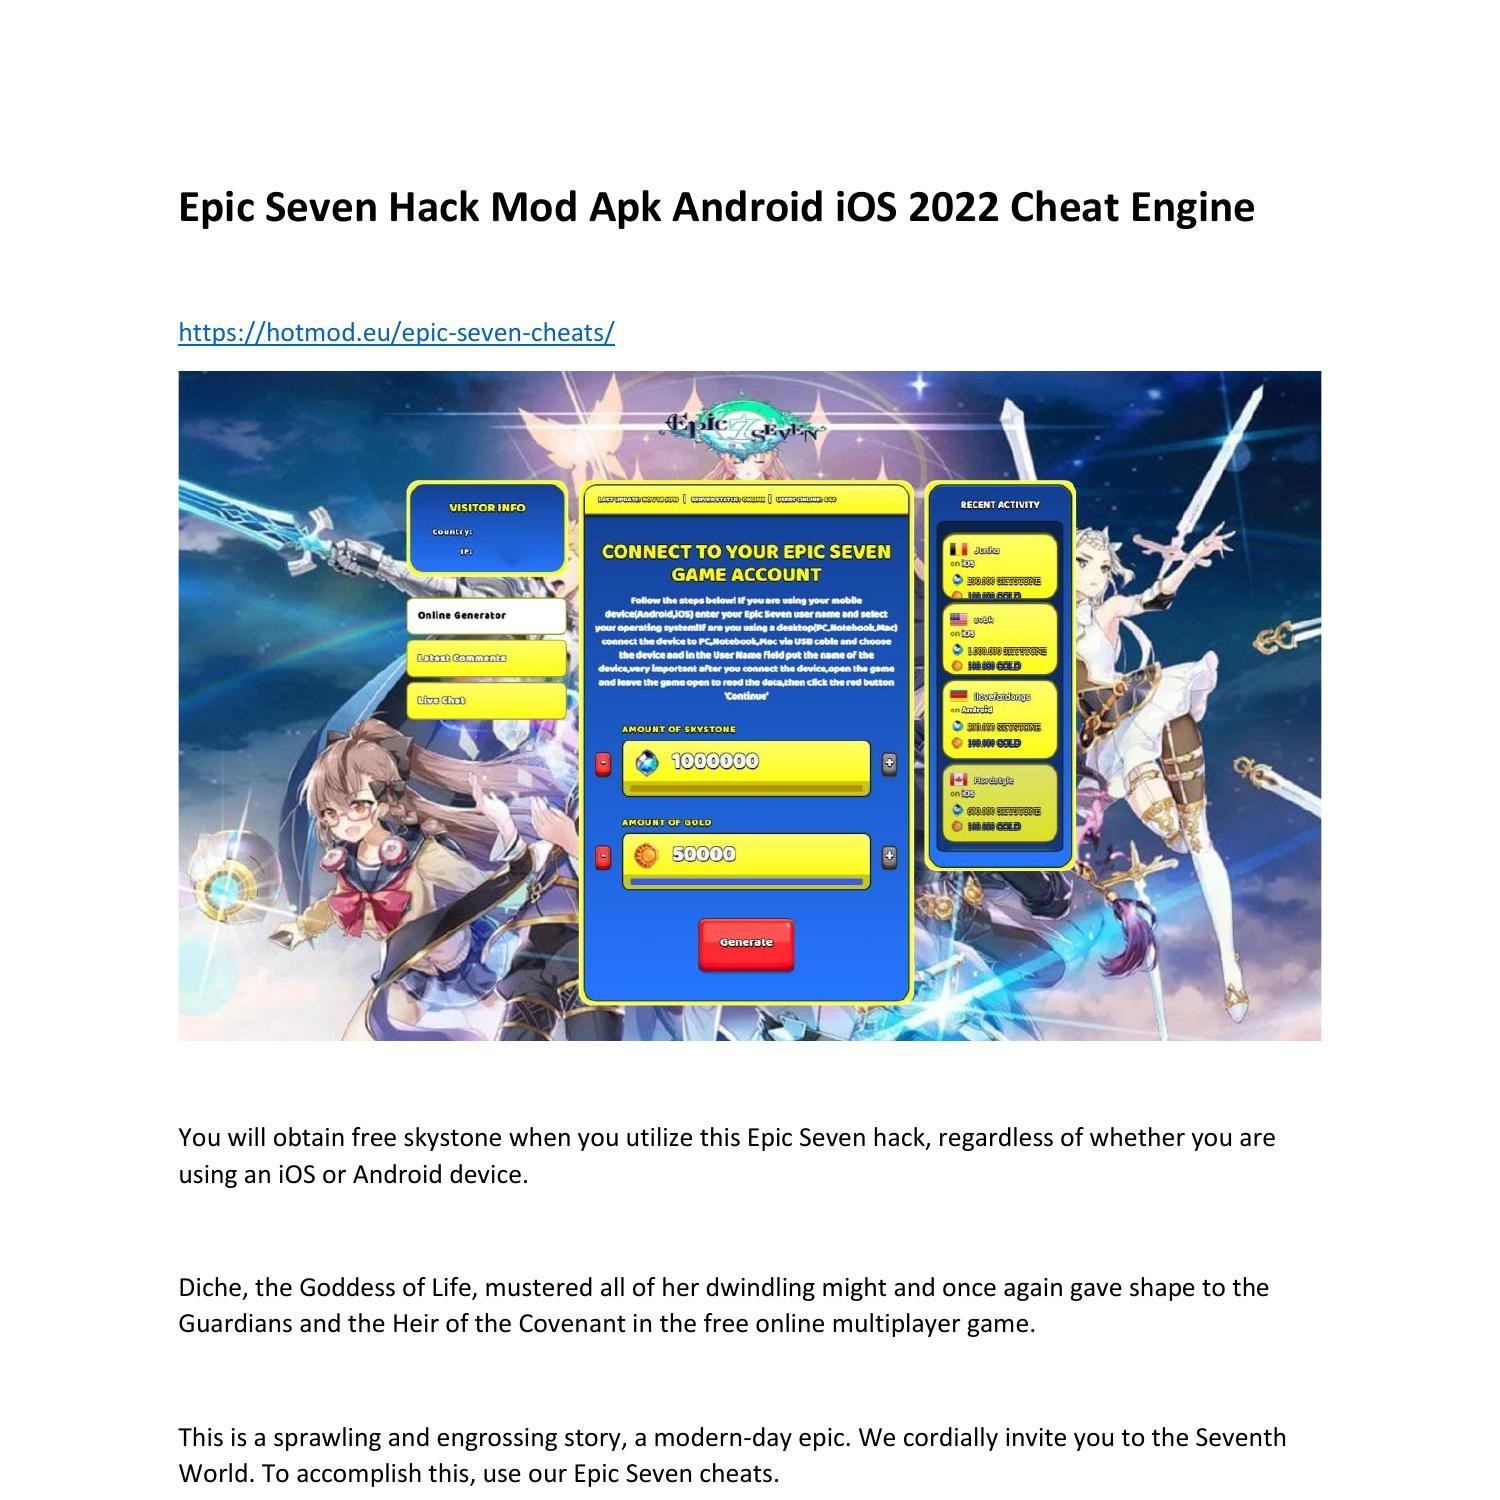 Cheat Engine APK Latest Version Download - Android